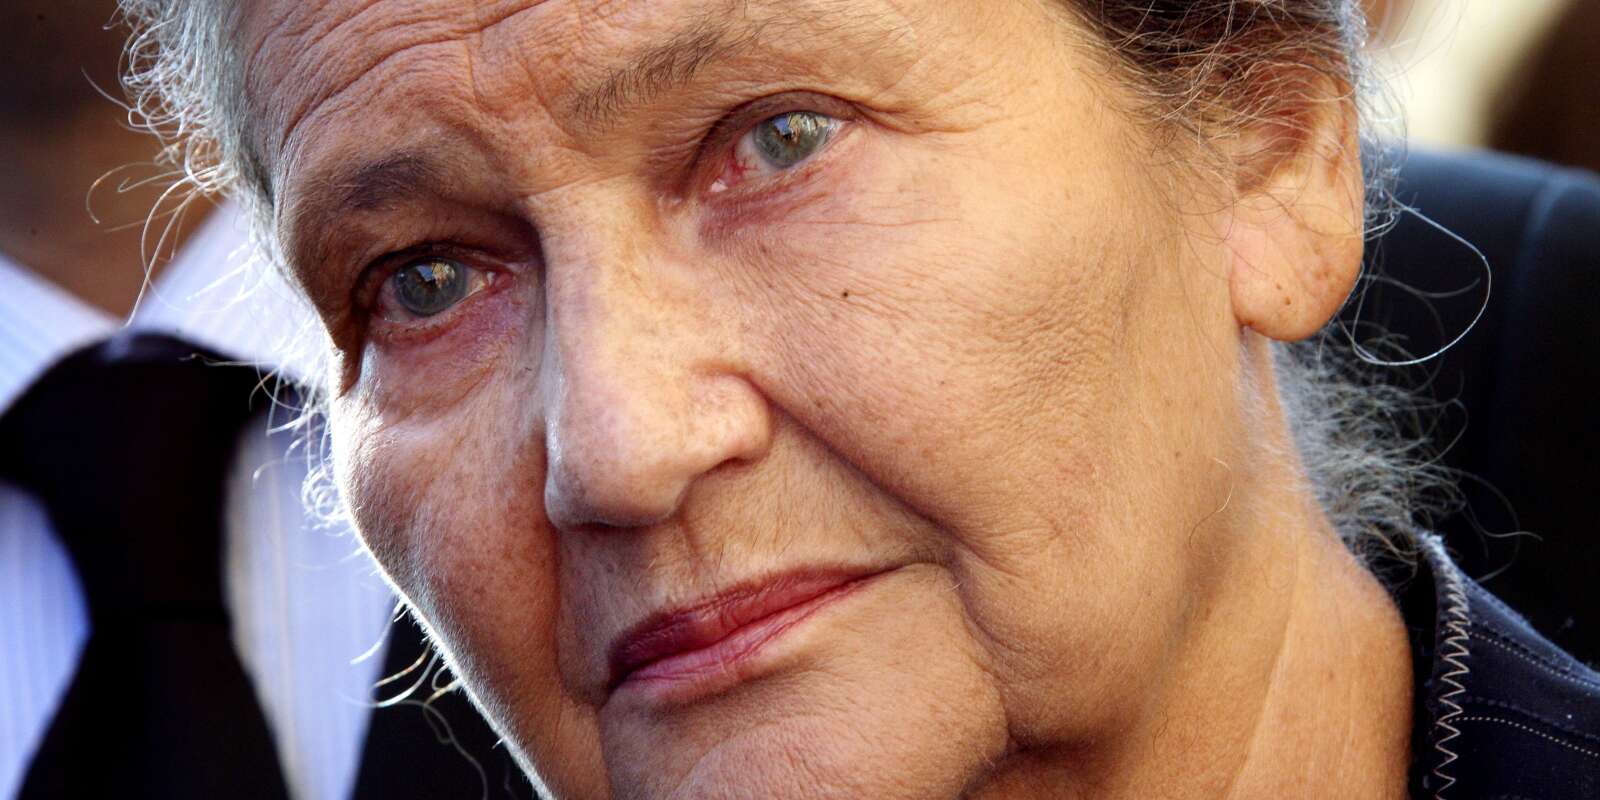 (FILES) This file photo taken on October 16, 2007 in Nice shows French former minister Simone Veil attending a ceremony in memory of her brother and other 10 Jewish children, pupils of Parc Imperial school, deported by nazis during the WWII. Simone Veil, an Auschwitz survivor who played a leading role in legalising contraception and abortion in France, died on June 30, 2017 aged 89, her son said. Veil, an icon of French politics and the first president of the European Parliament, died at her home, Jean Veil said. / AFP / VALERY HACHE